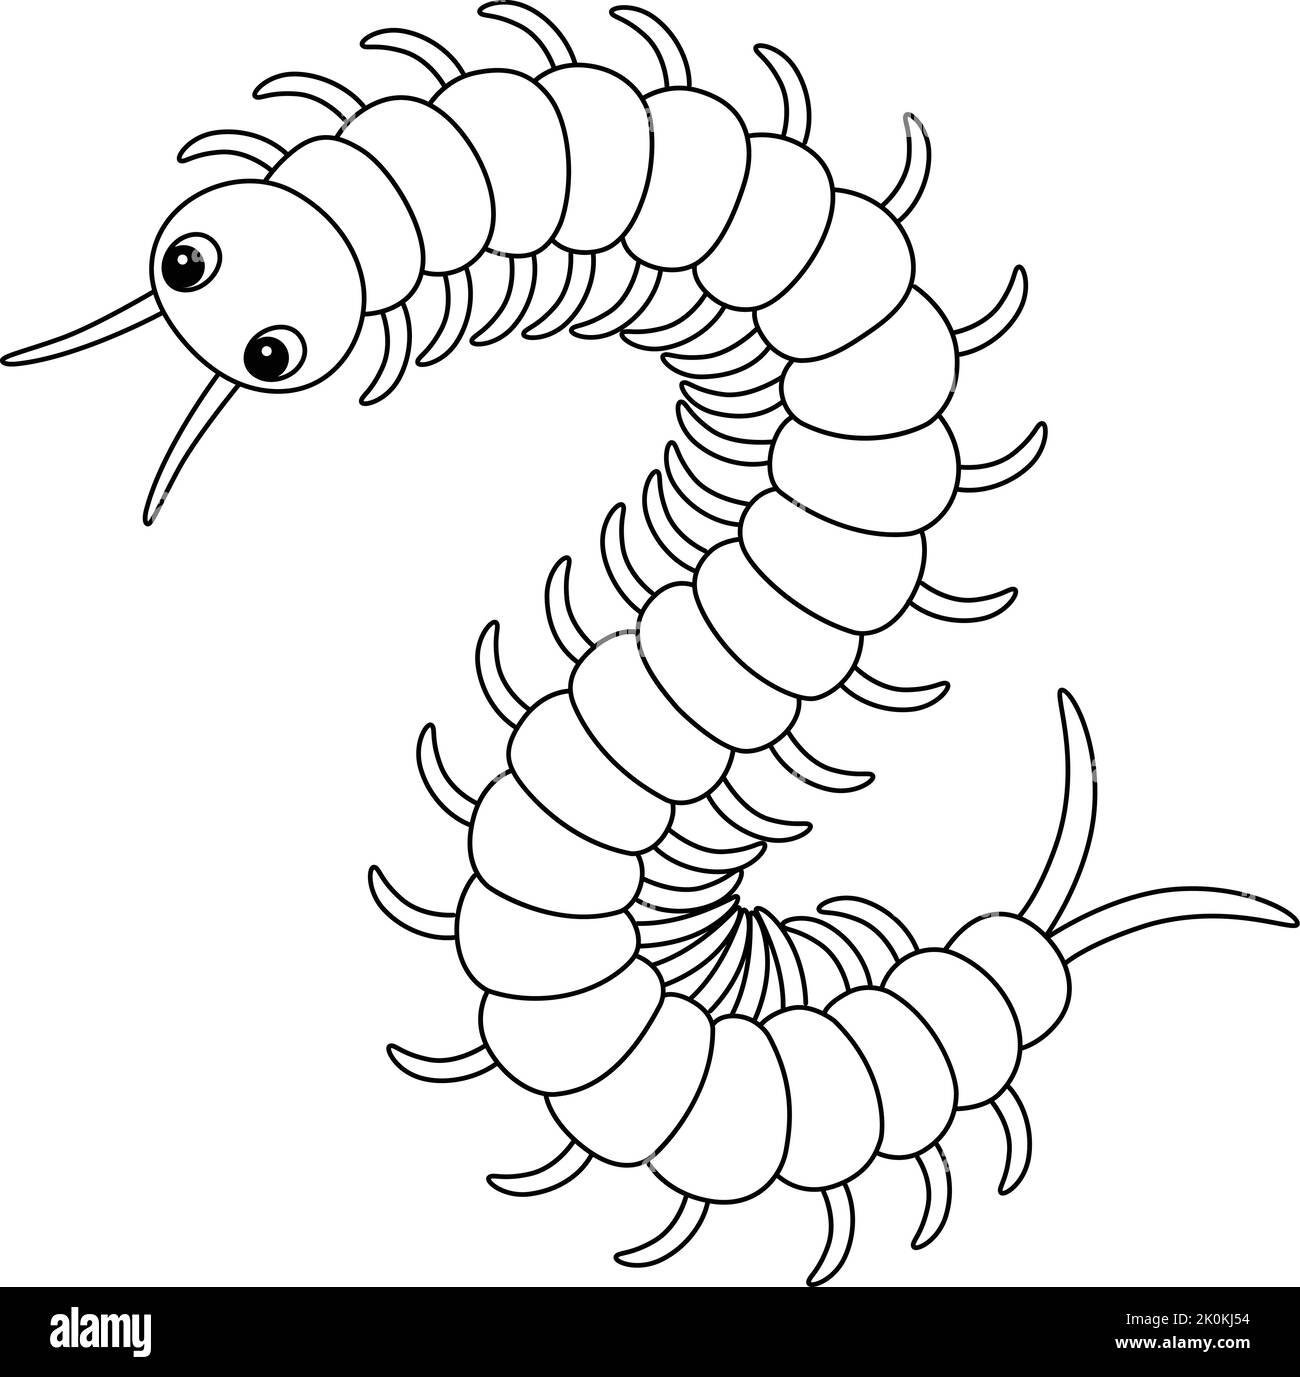 Centipede Animal Isolated Coloring Page for Kids Stock Vector